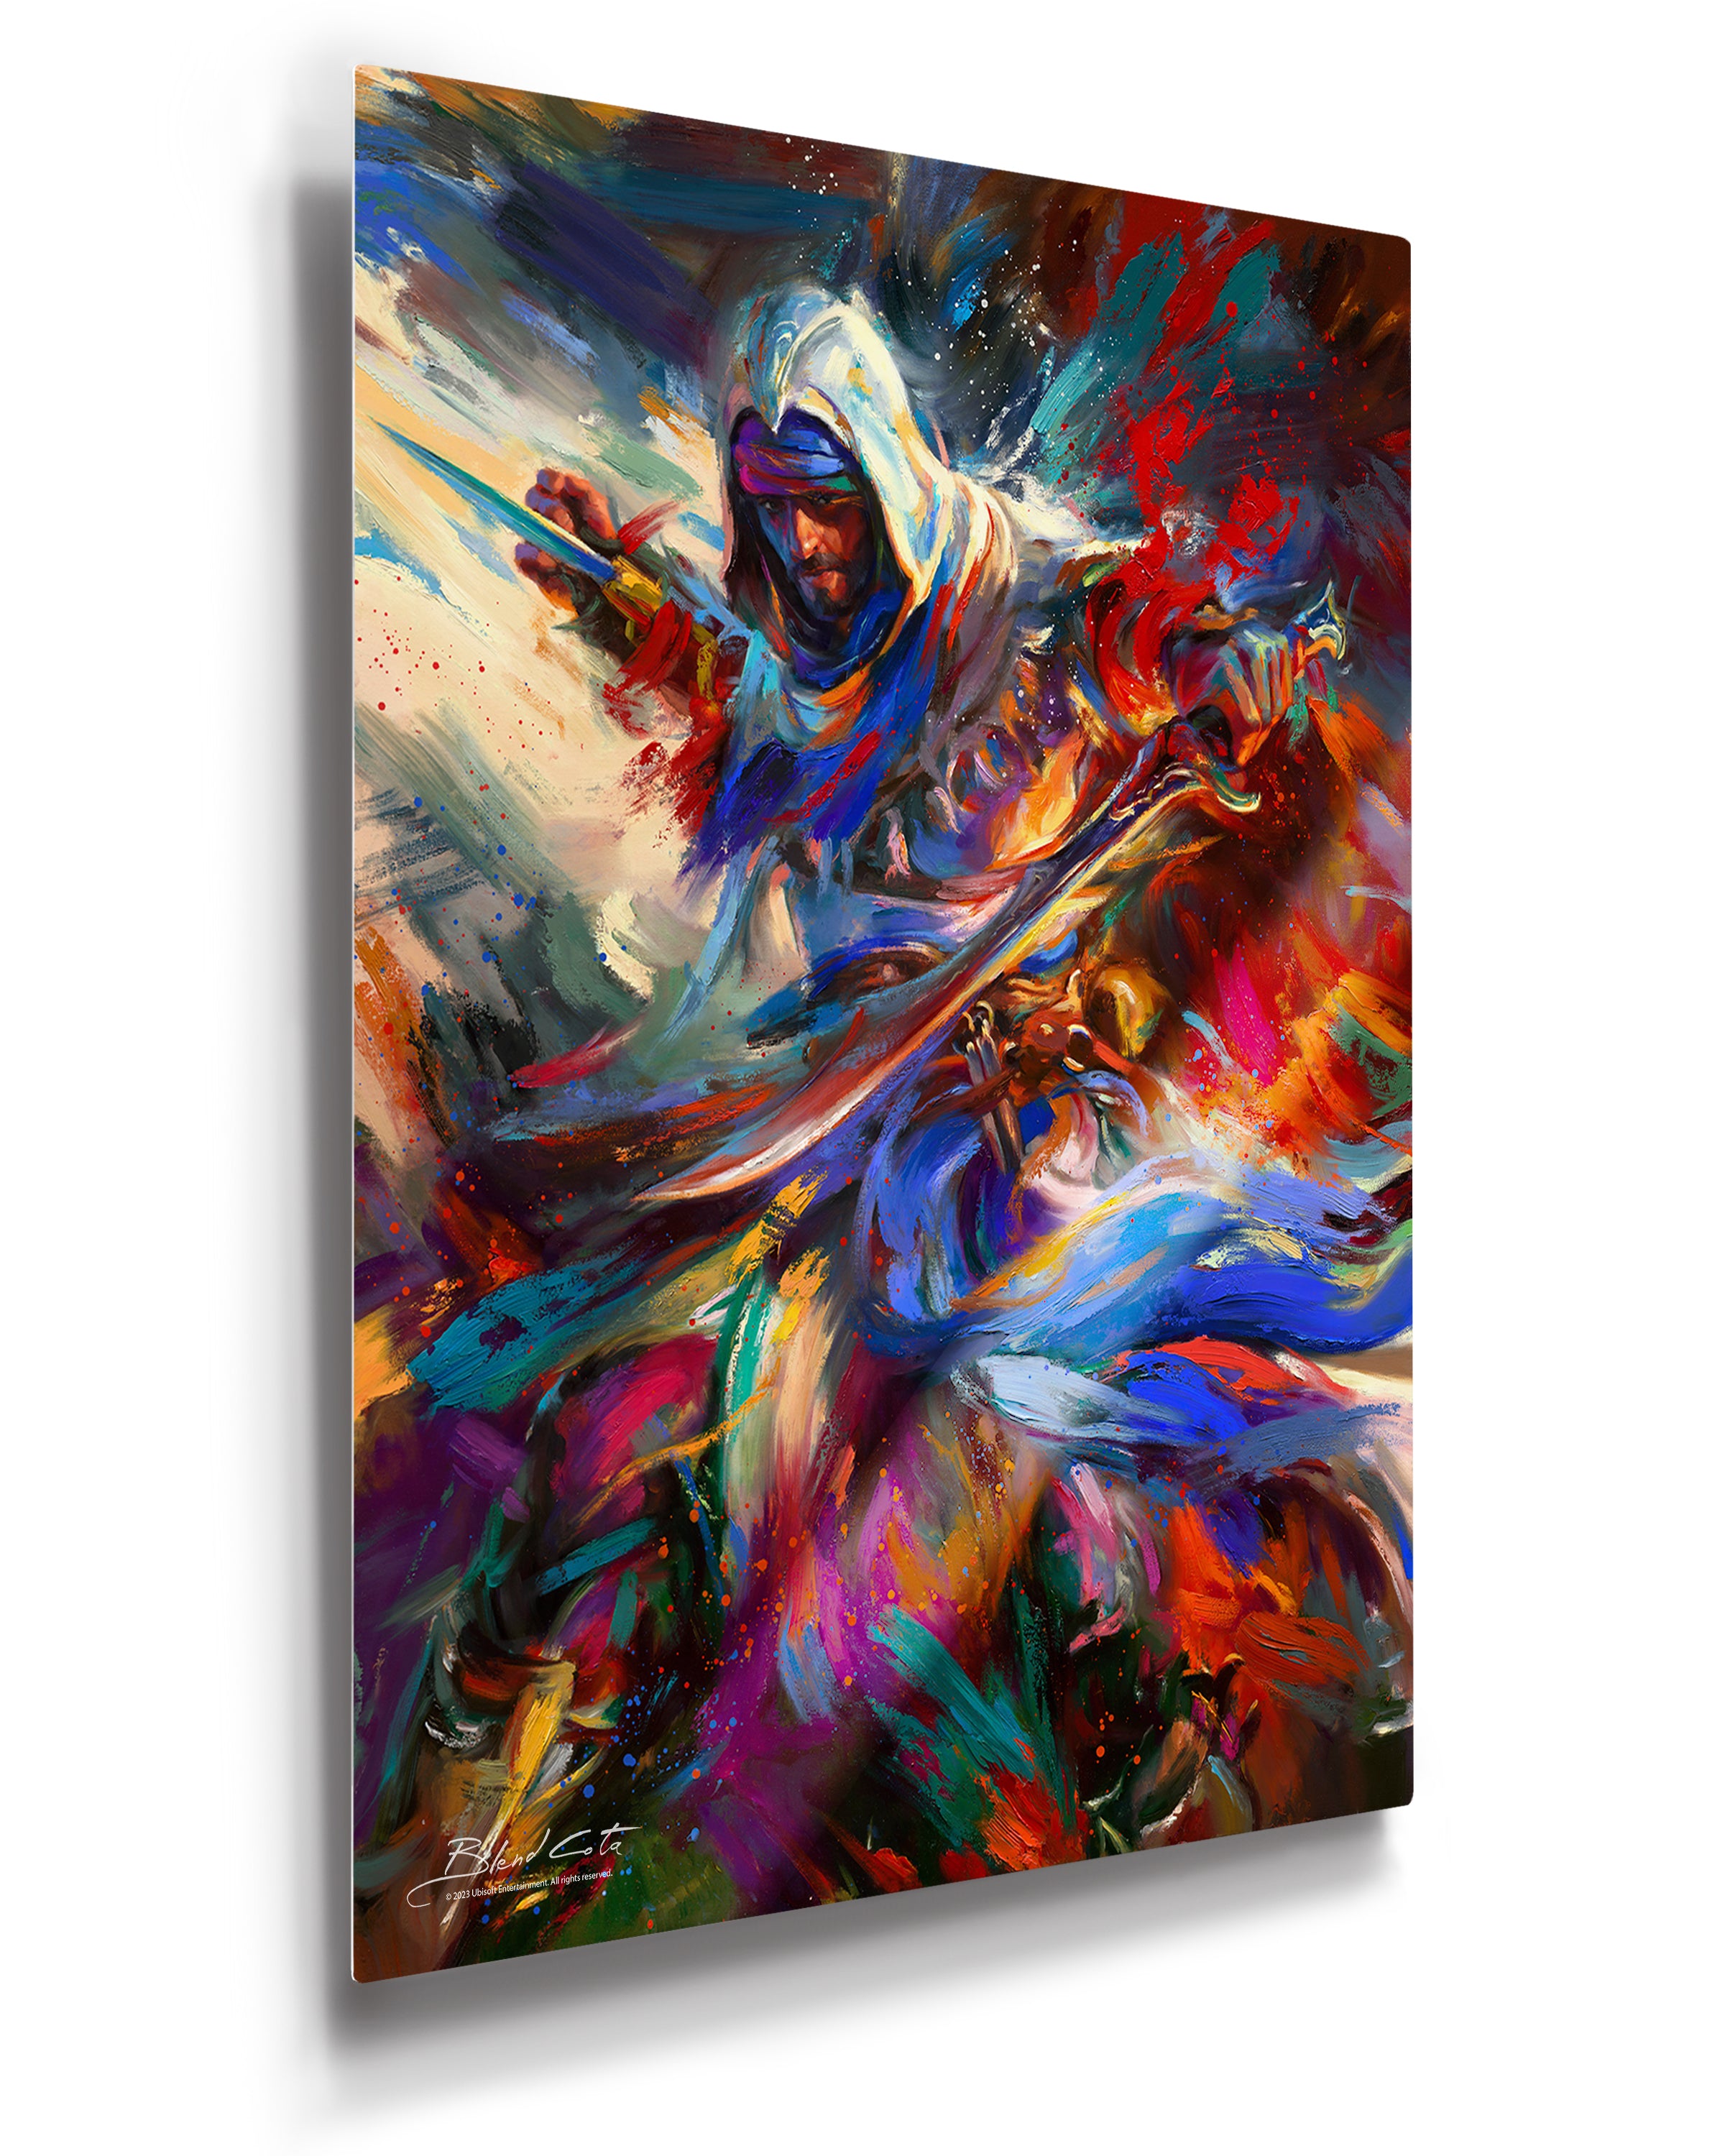 Limited Edition glossy metal print of Assassin's Creed Basim of Mirage bursting forth with energy and painted with colorful brushstrokes in an expressionistic style.